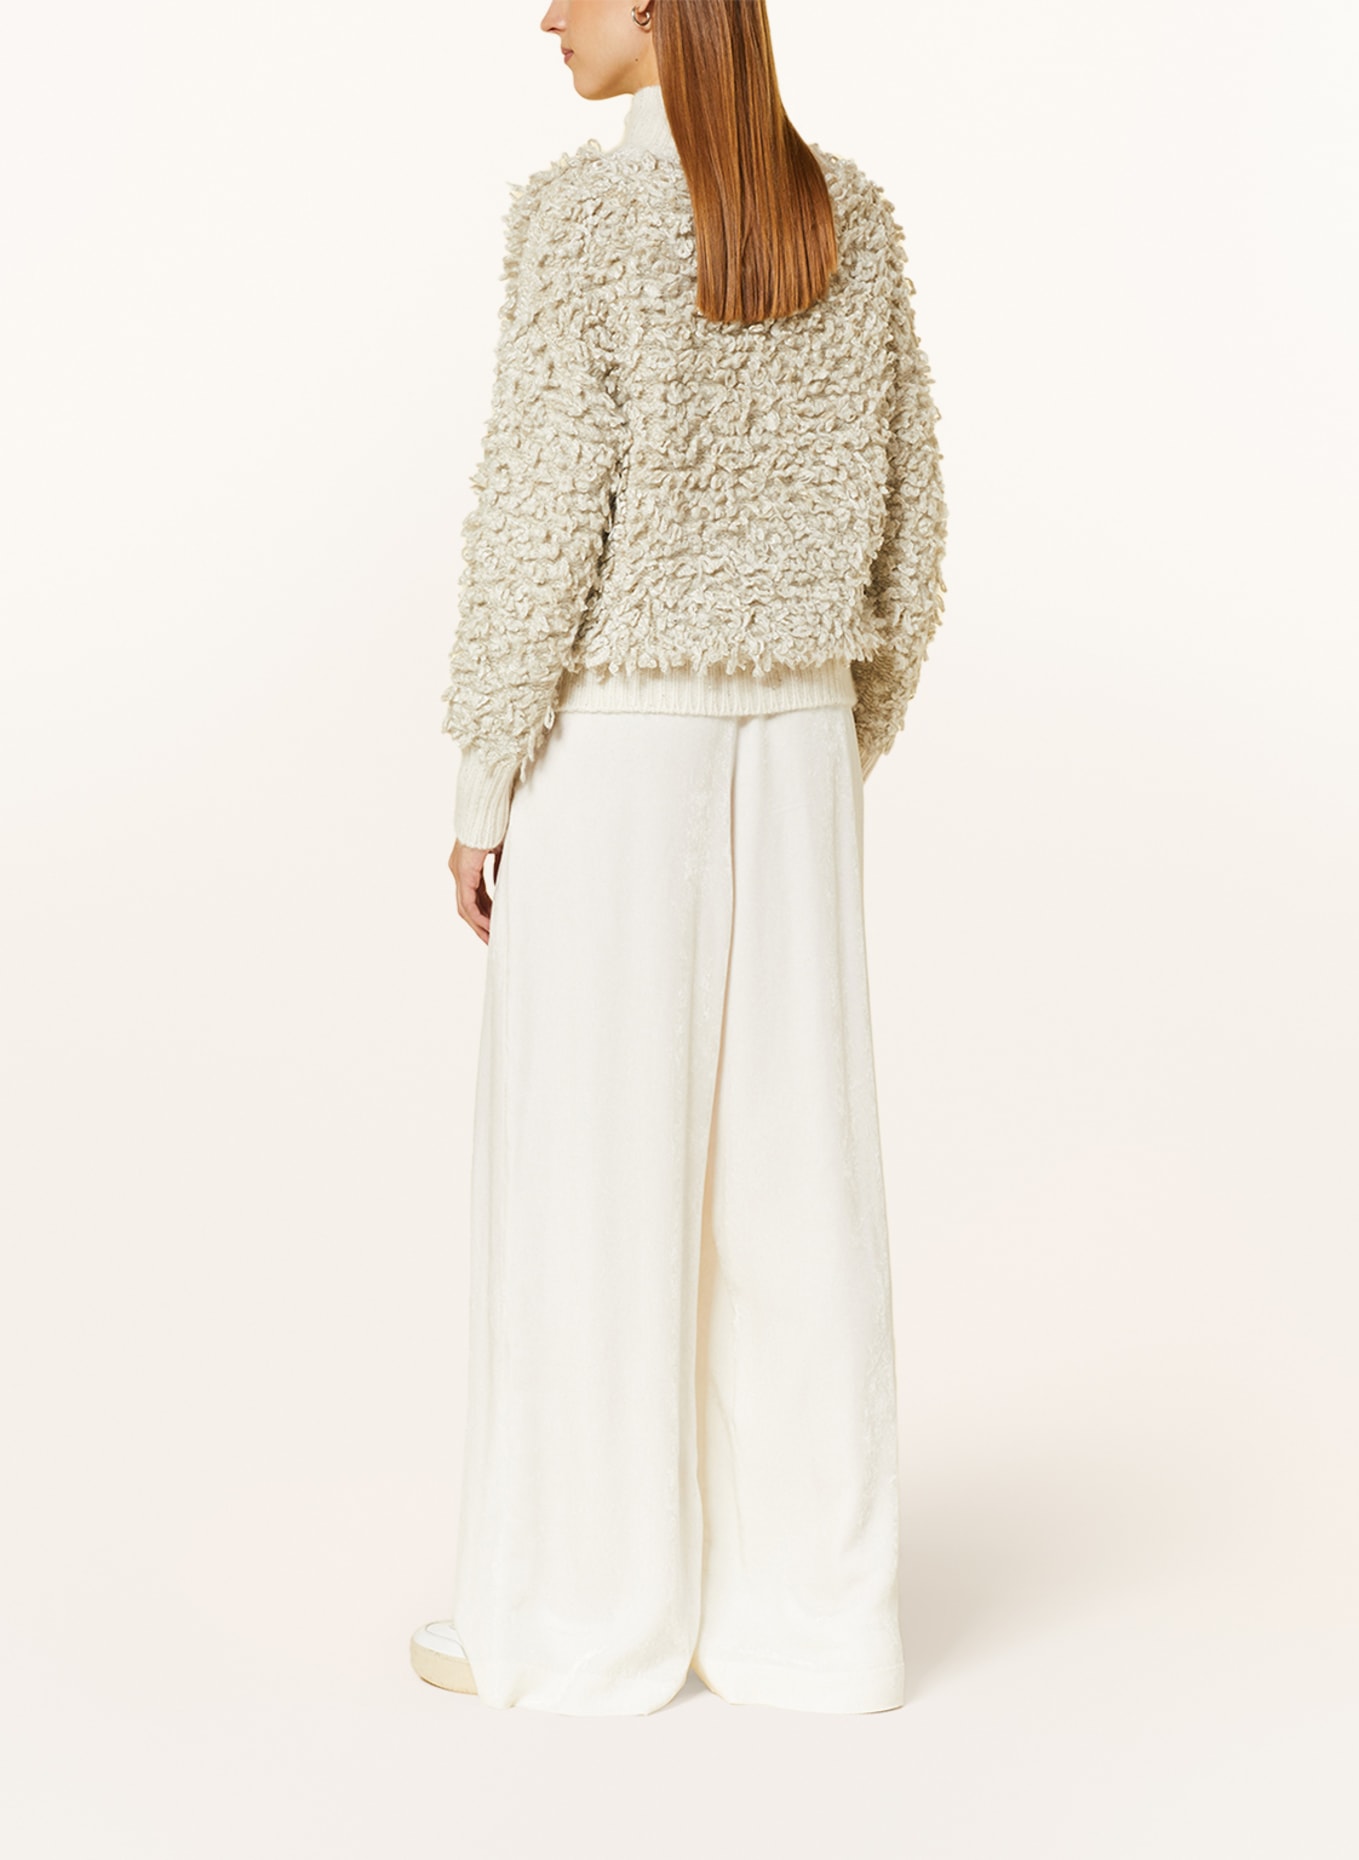 FABIANA FILIPPI Cardigan with glitter thread and Sequins, Color: WHITE/ LIGHT GRAY/ SILVER (Image 3)